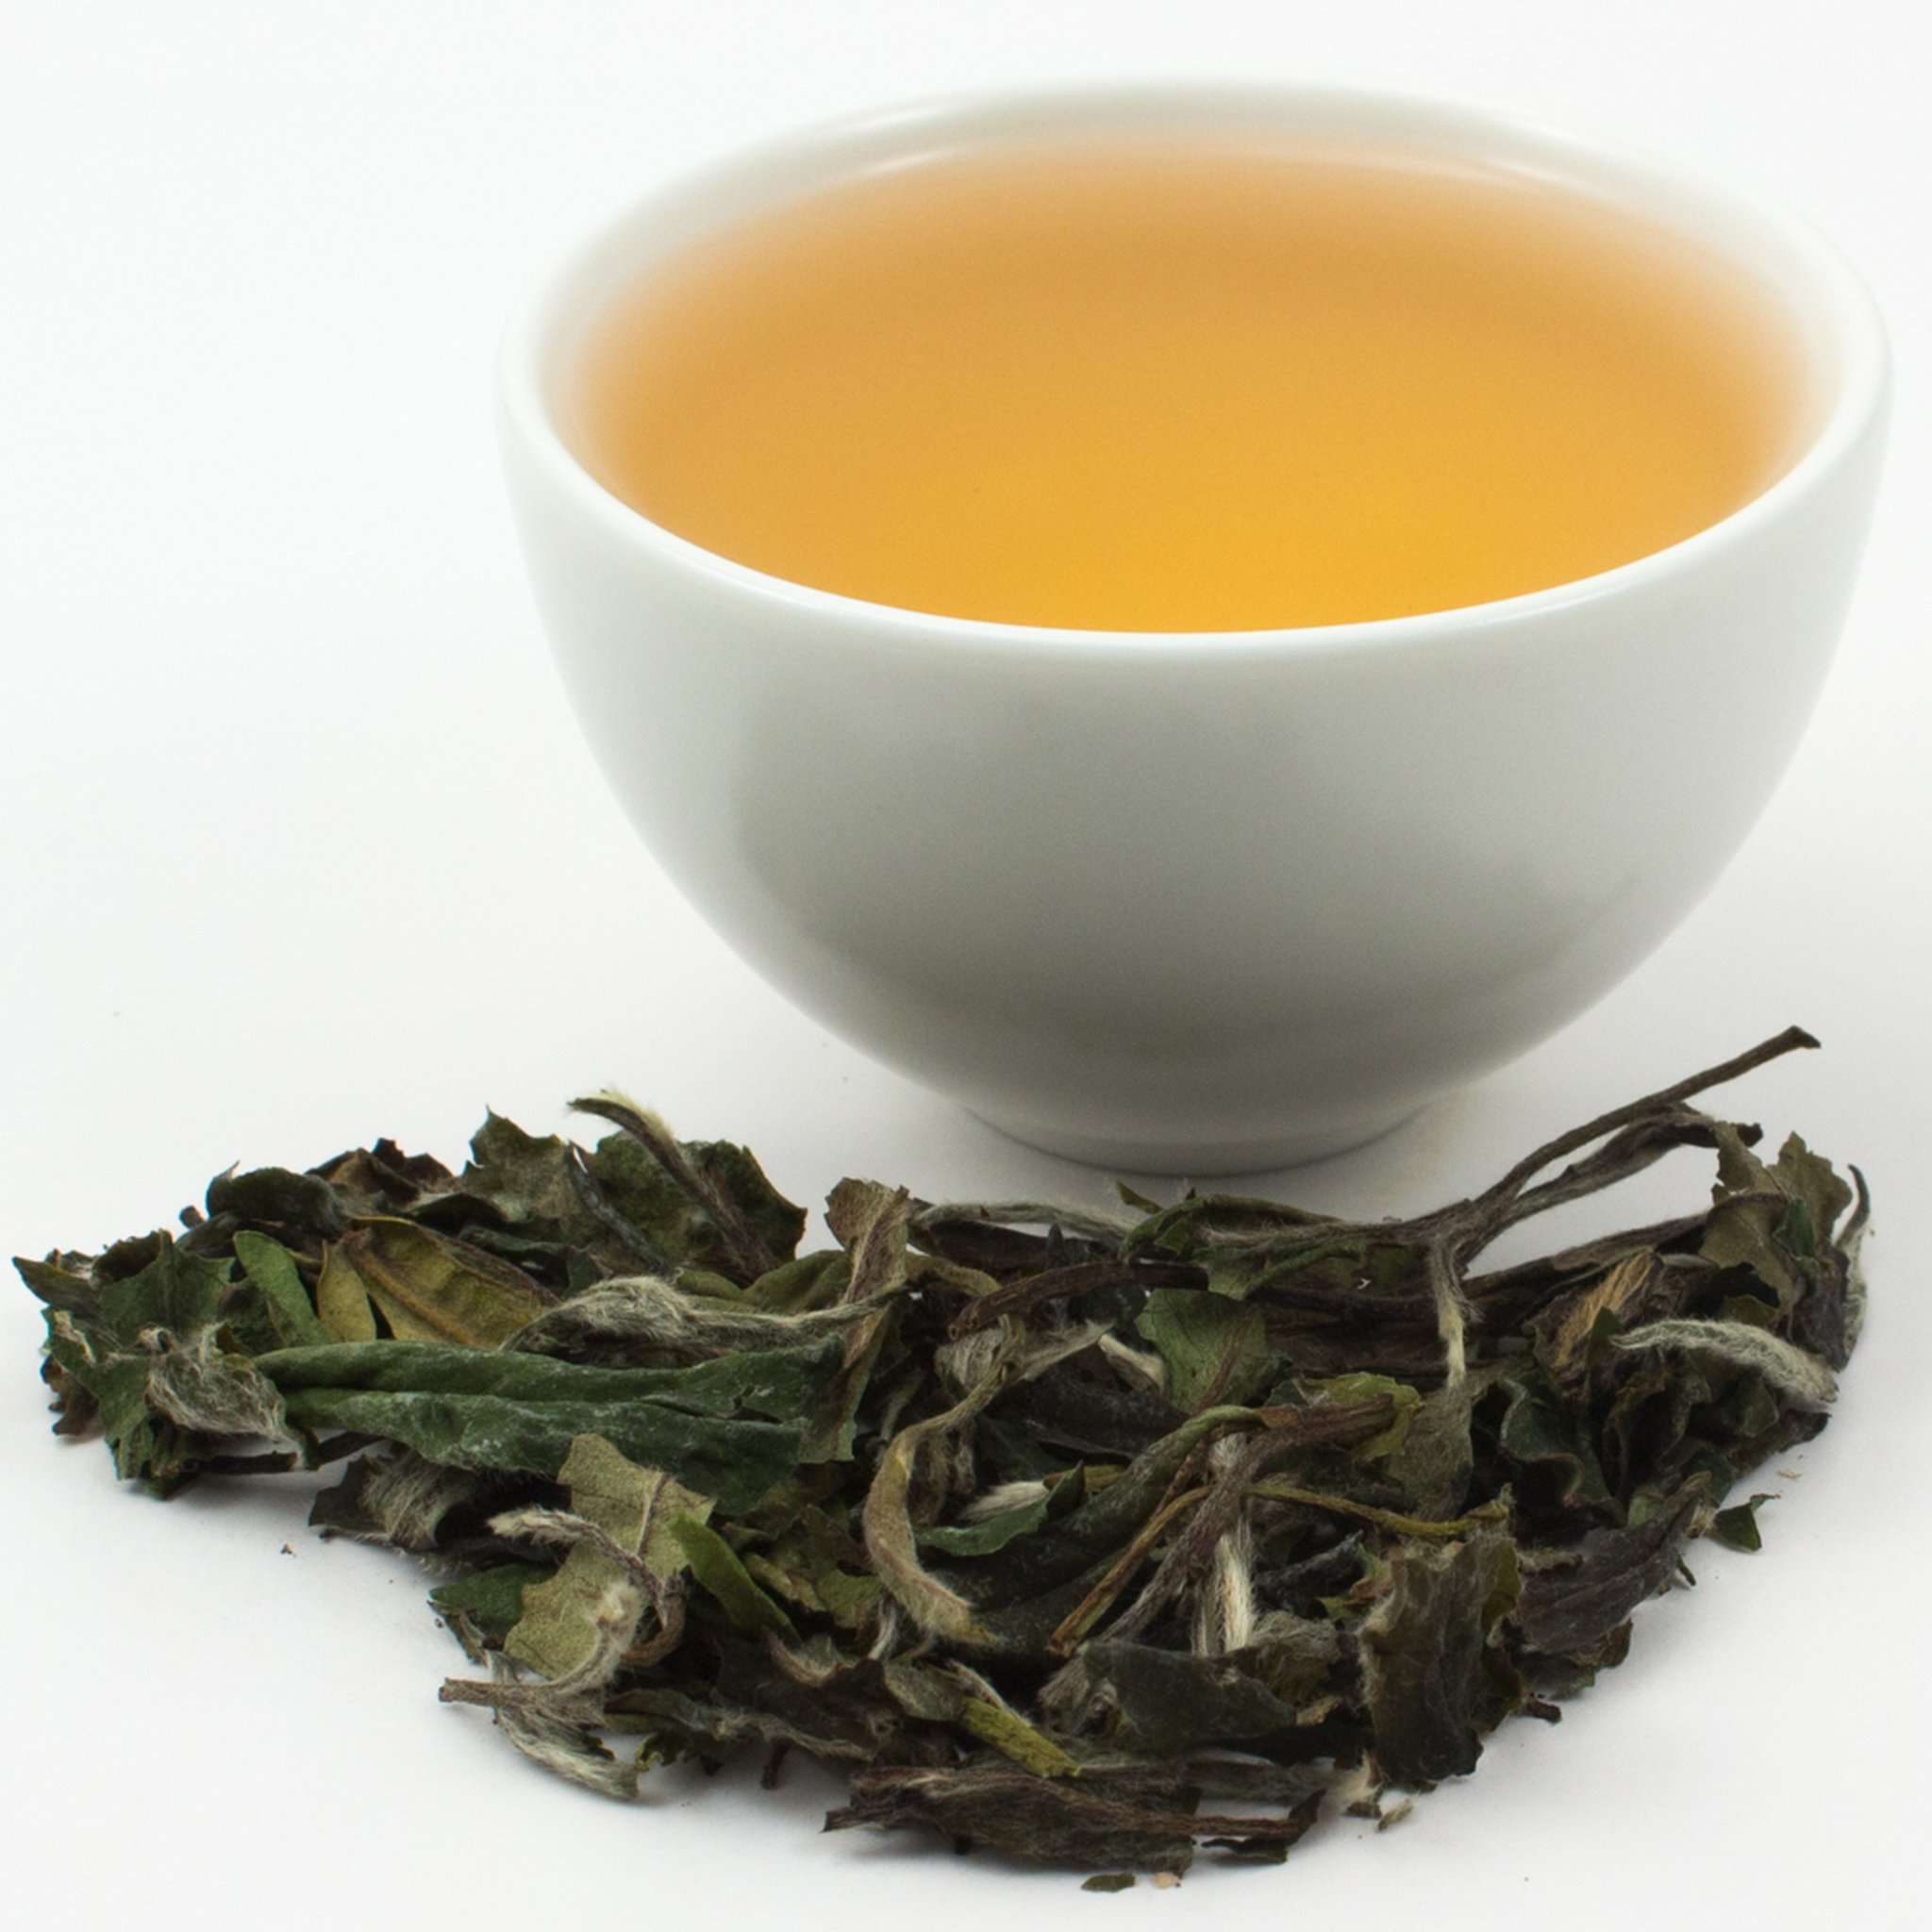 everbluedesign: Where To Buy White Tea